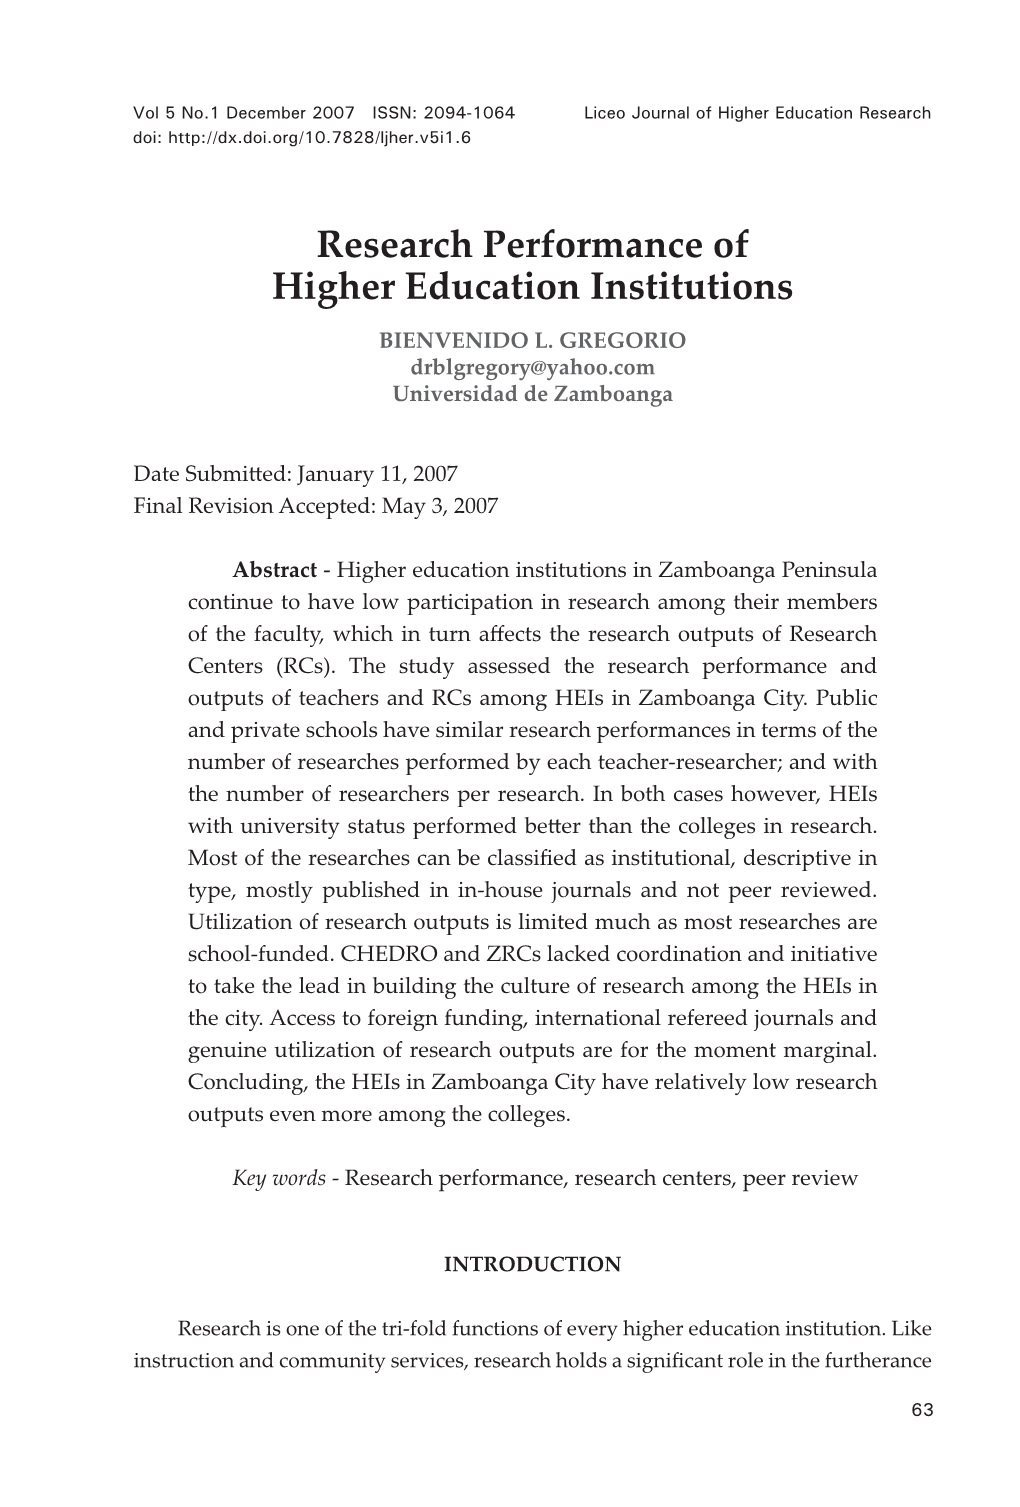 Research Performance of Higher Education Institutions BIENVENIDO L